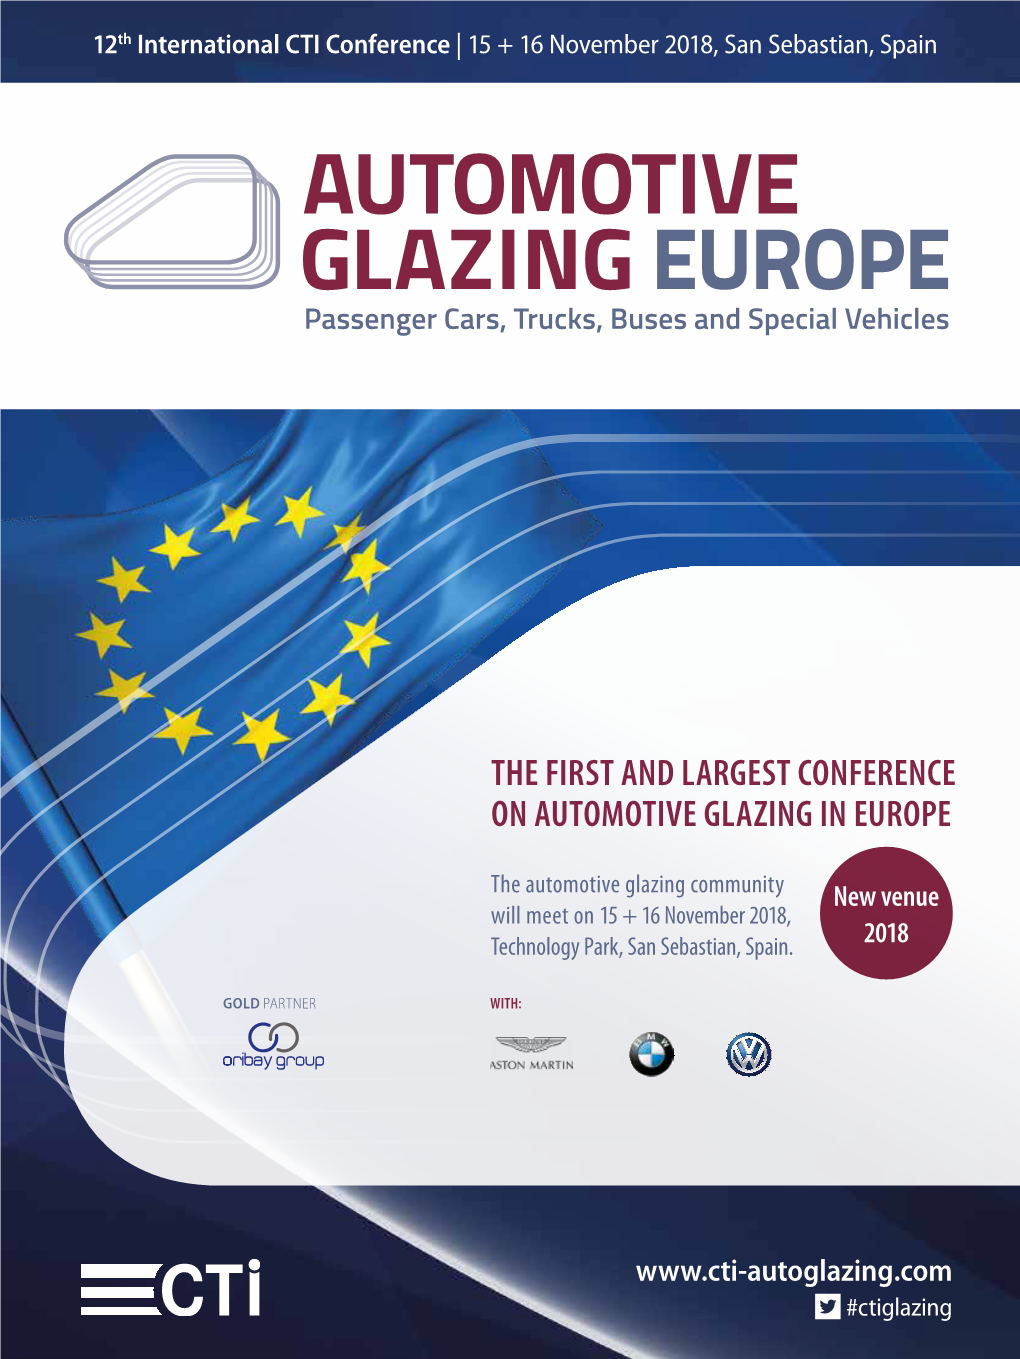 The First and Largest Conference on Automotive Glazing in Europe